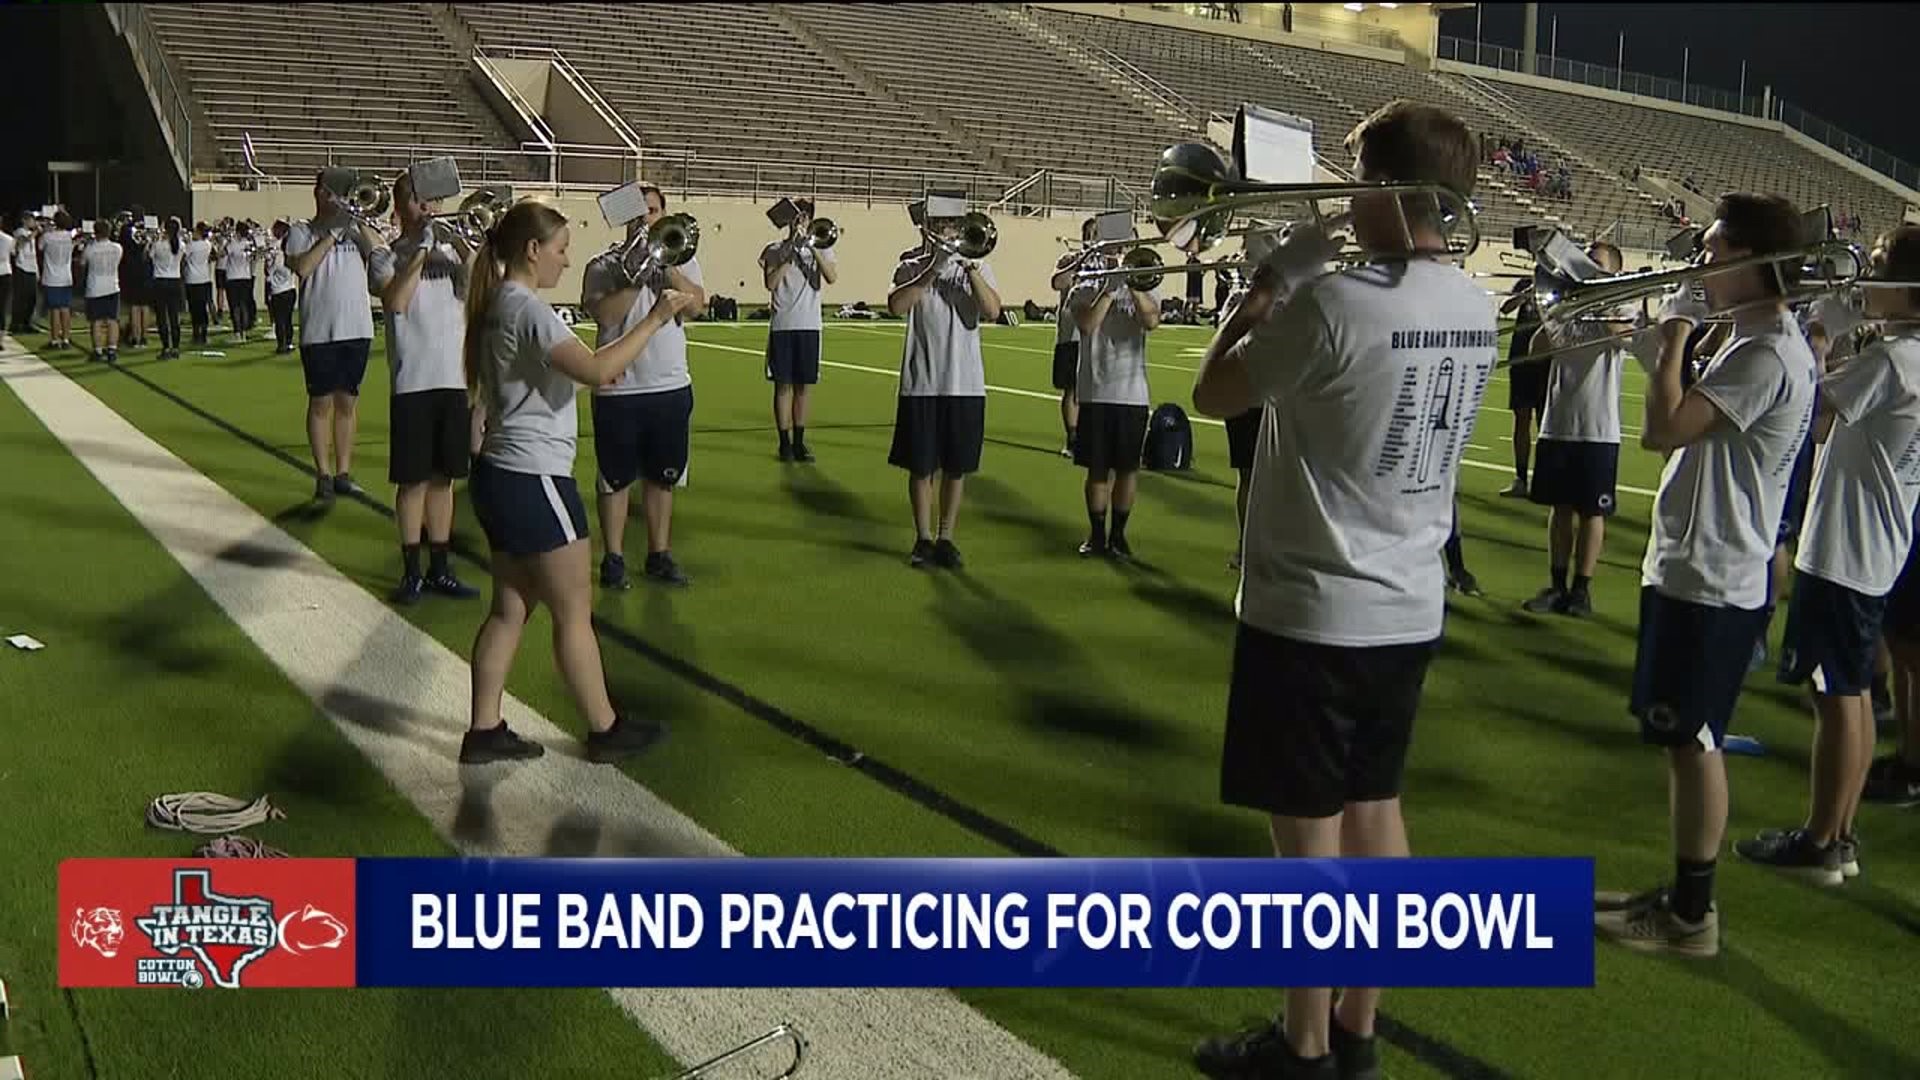 Penn State's Blue Band Practicing for Cotton Bowl